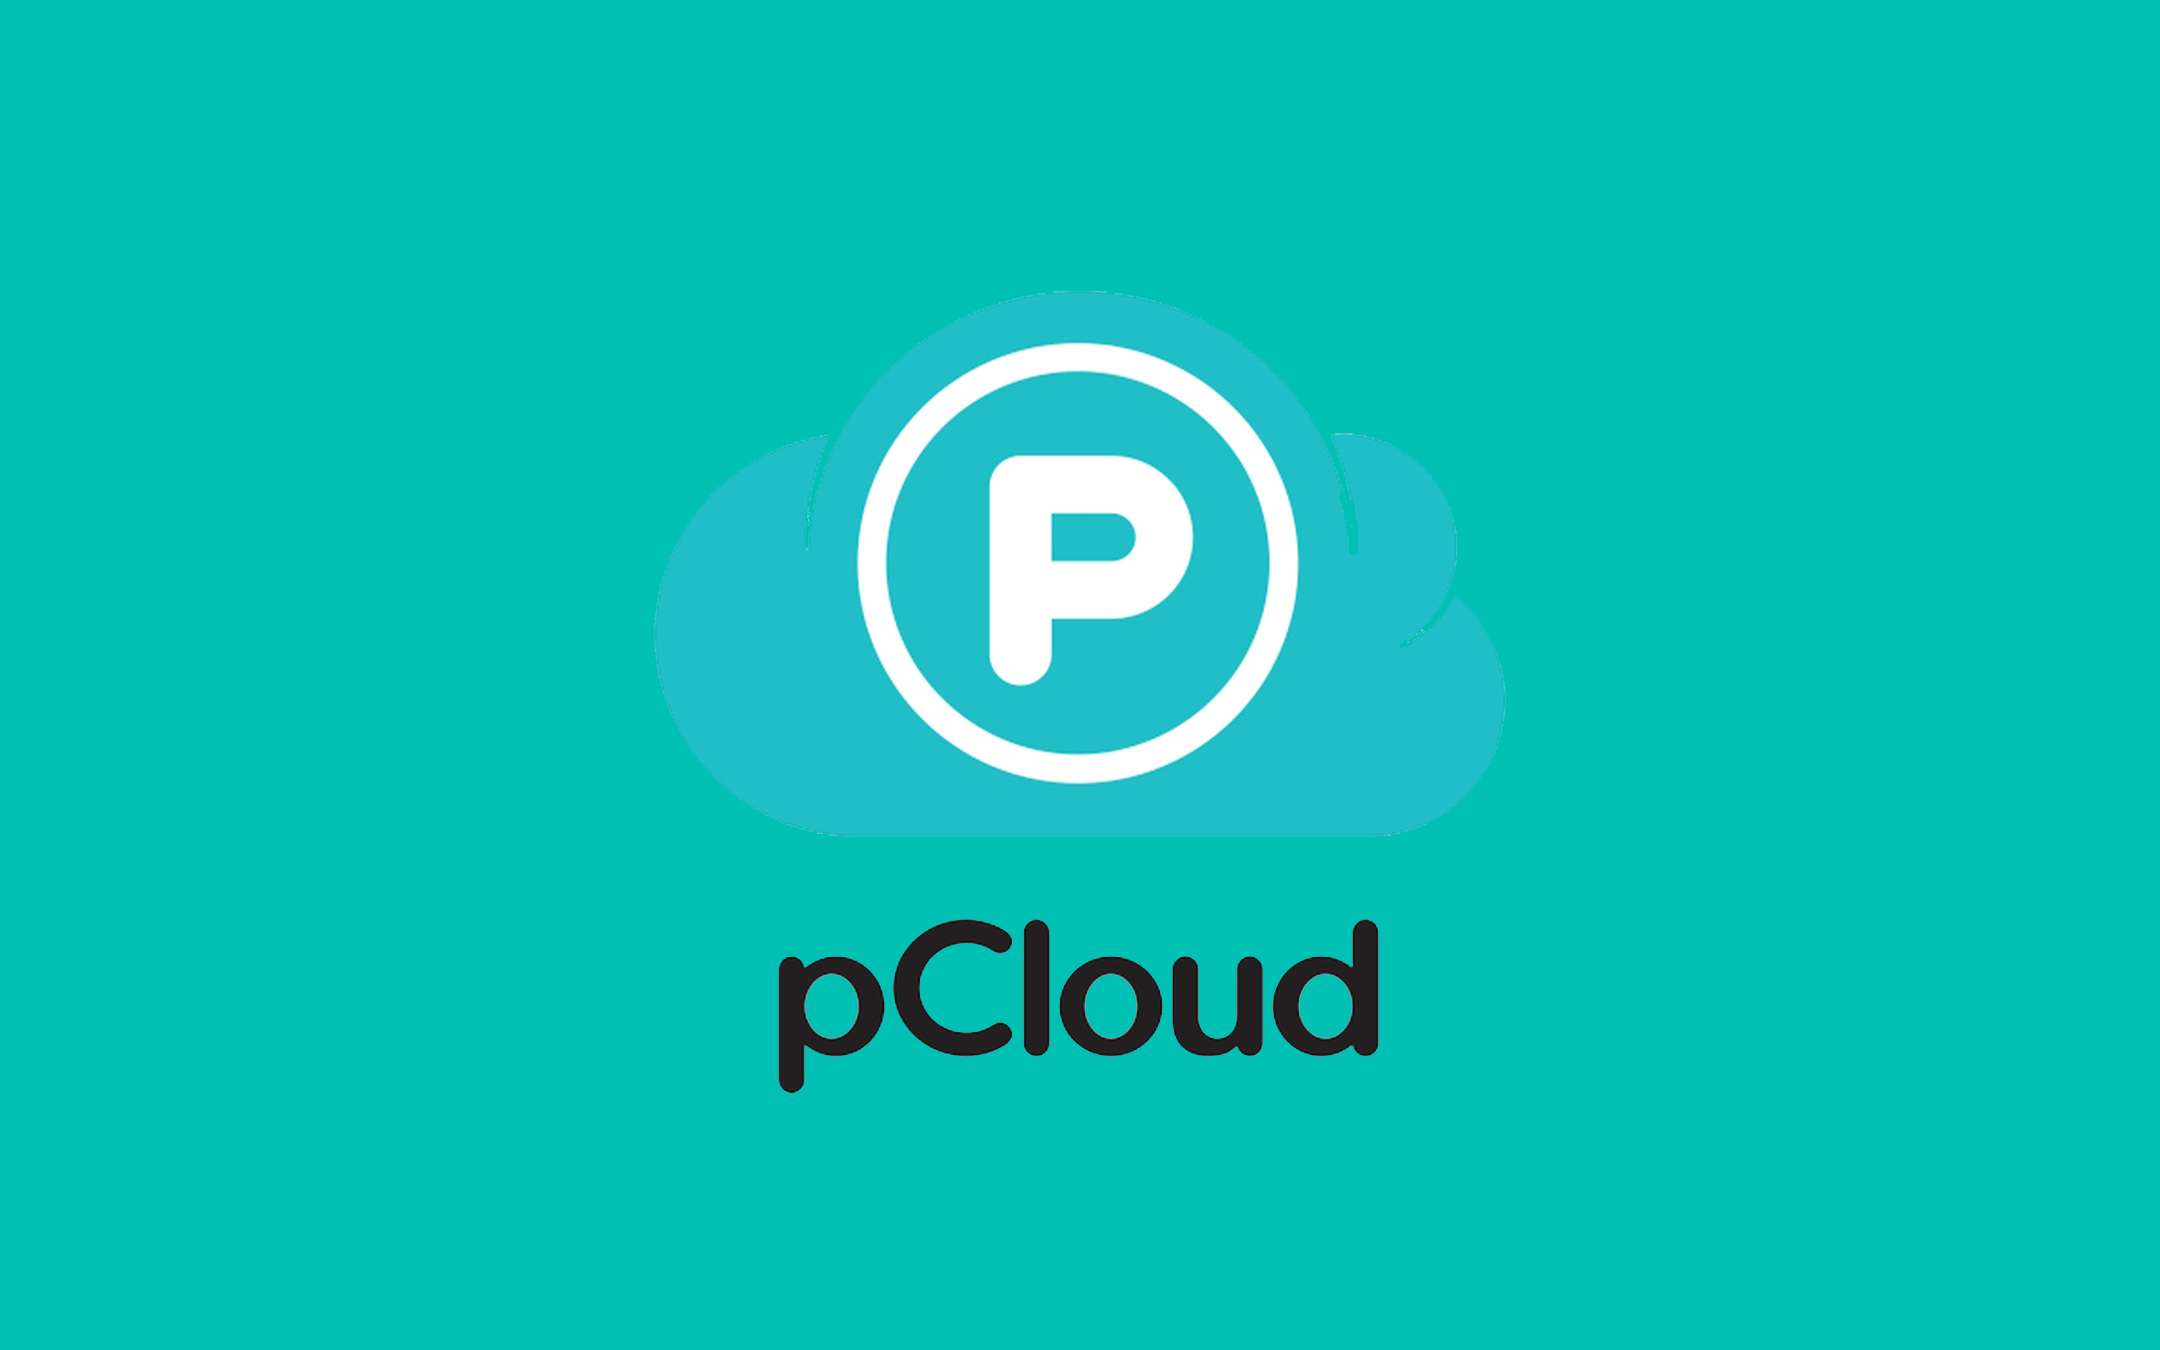 A image of pCloud